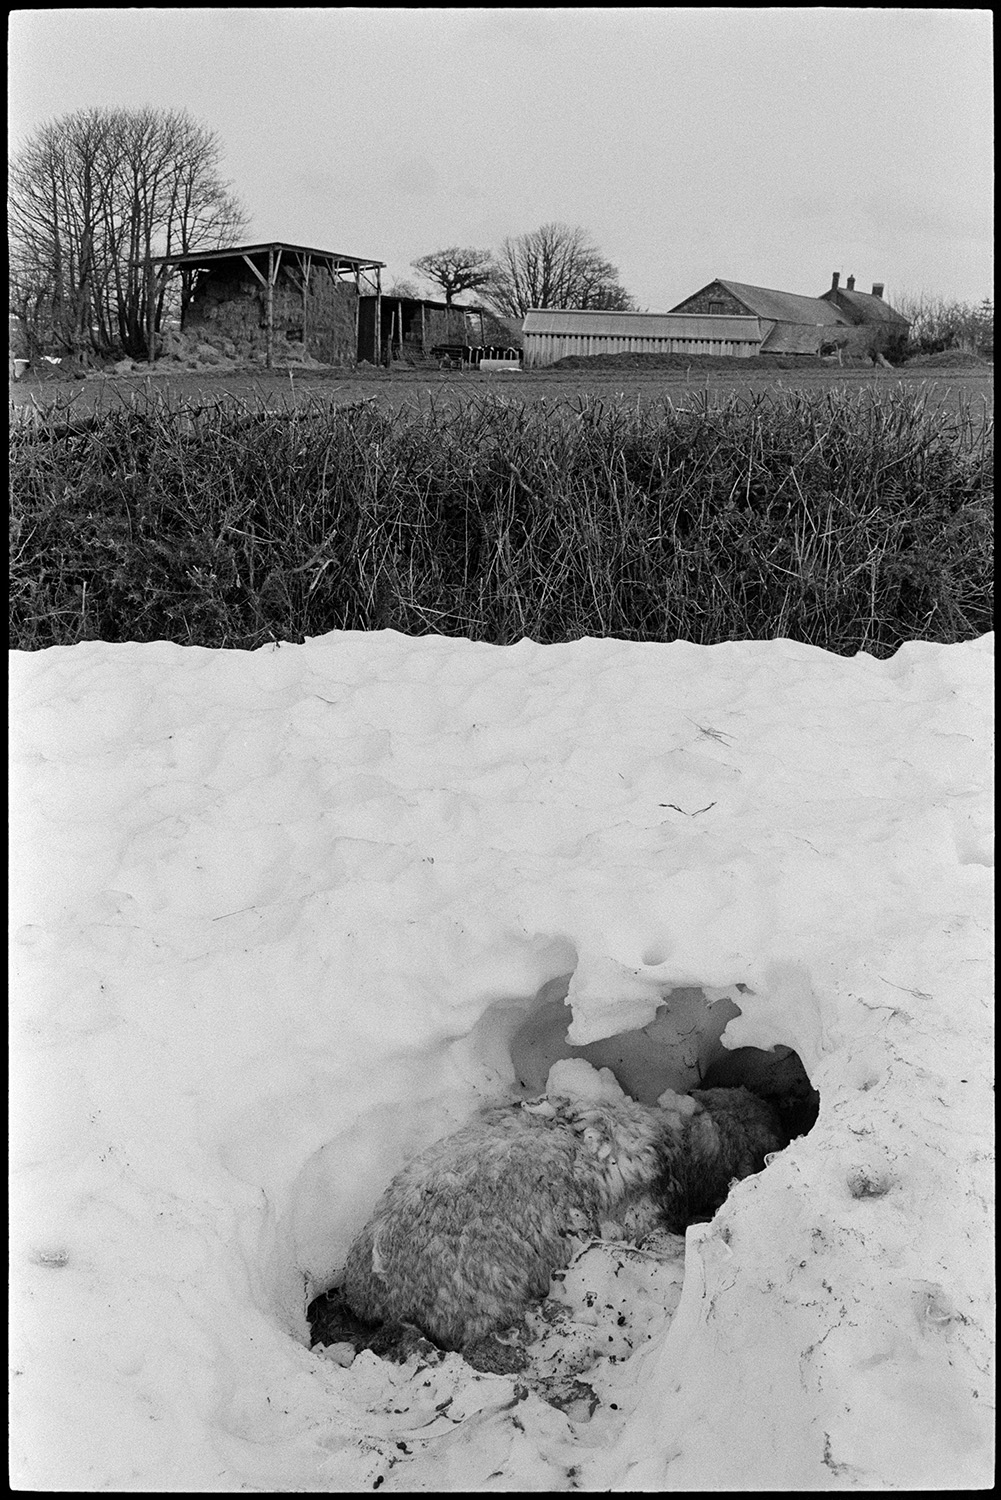 Snow. Sheep which had died in blizzard.
[The body of a dead sheep in a hole in a snow drift under a hedge at Roborough. Farm buildings can be seen in the background.]